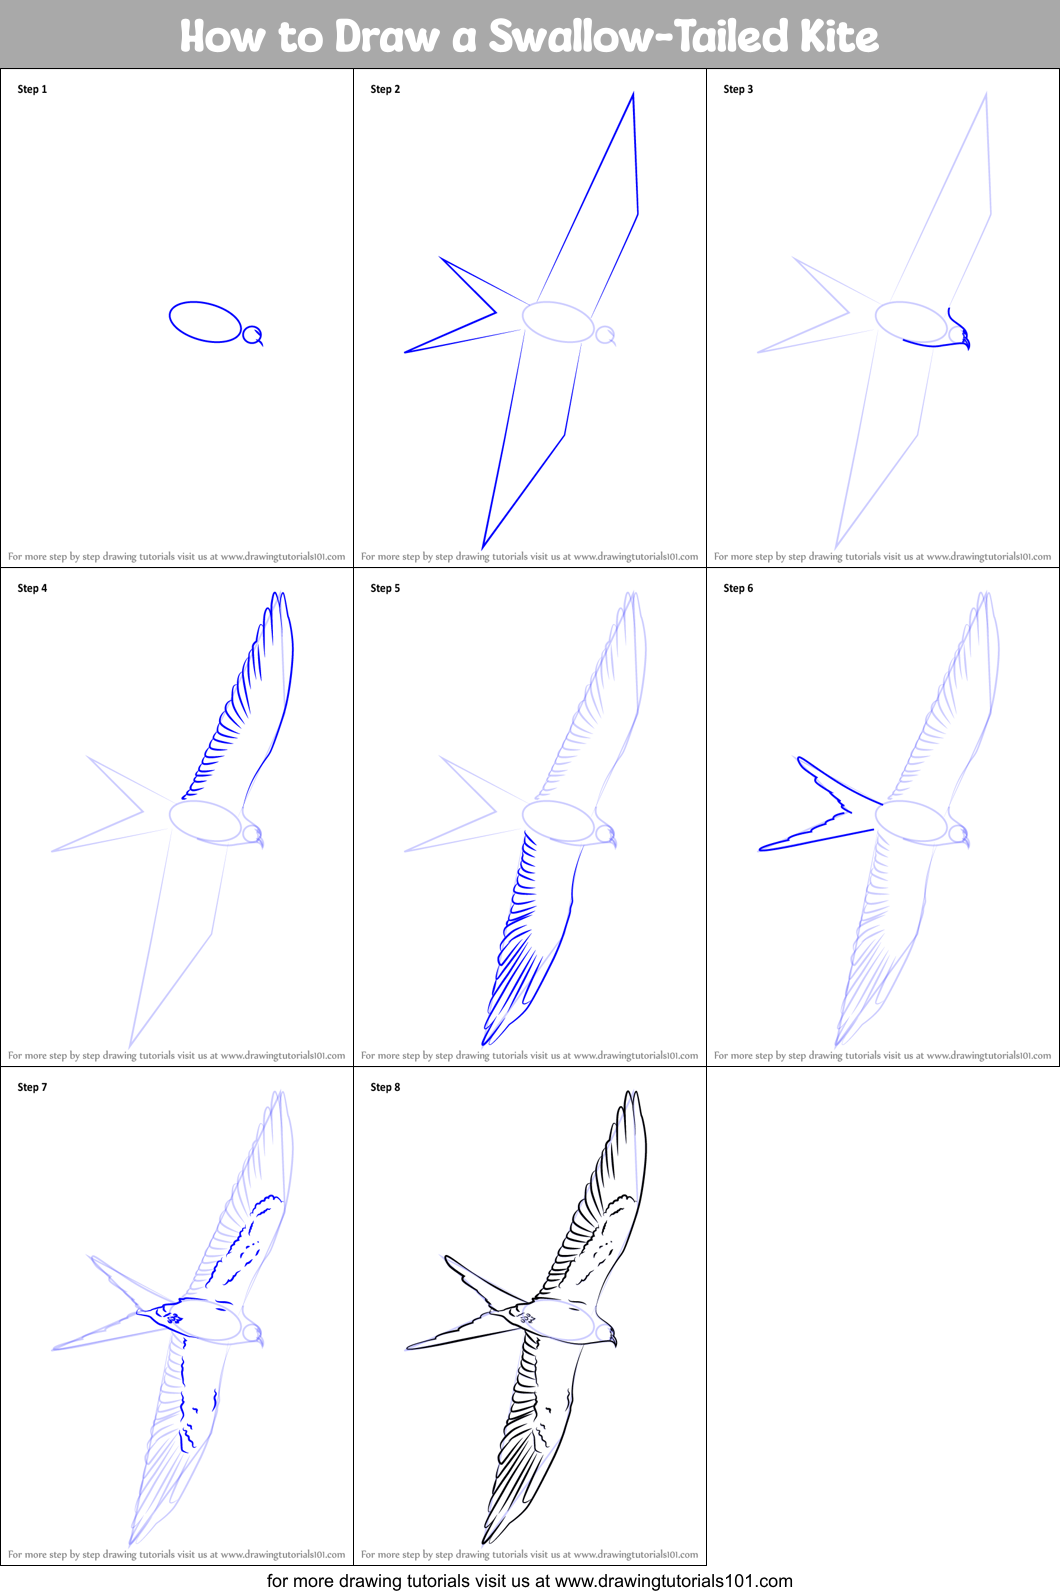 How to Draw a Swallow-Tailed Kite printable step by step drawing sheet